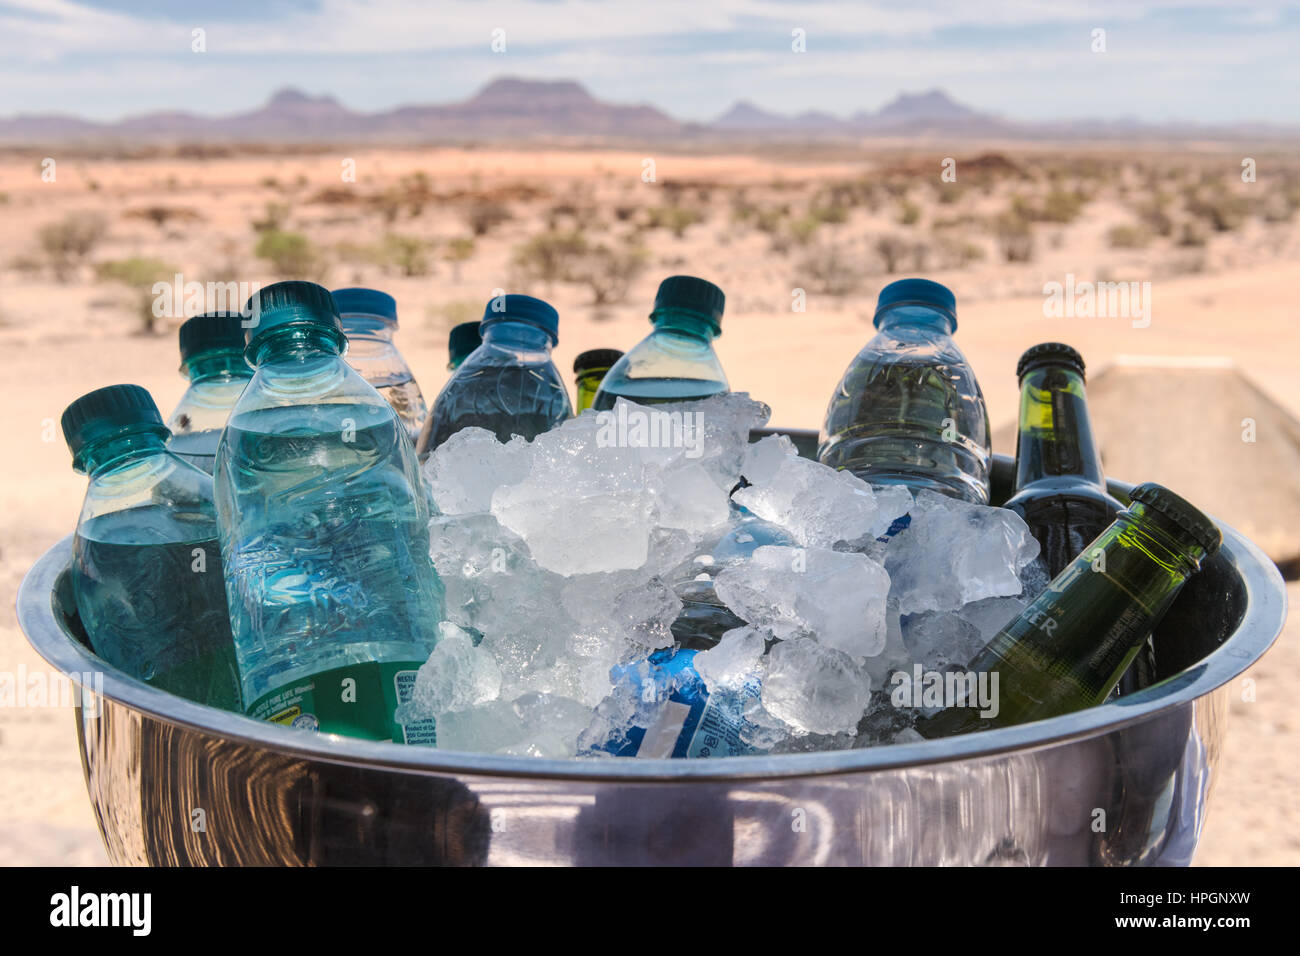 Bottles of water and beer in a stainless steel bowl with ice to keep them cool.  Pictured on a hot summer's day Doro Nawas Camp, Damaraland, Namibia. Stock Photo